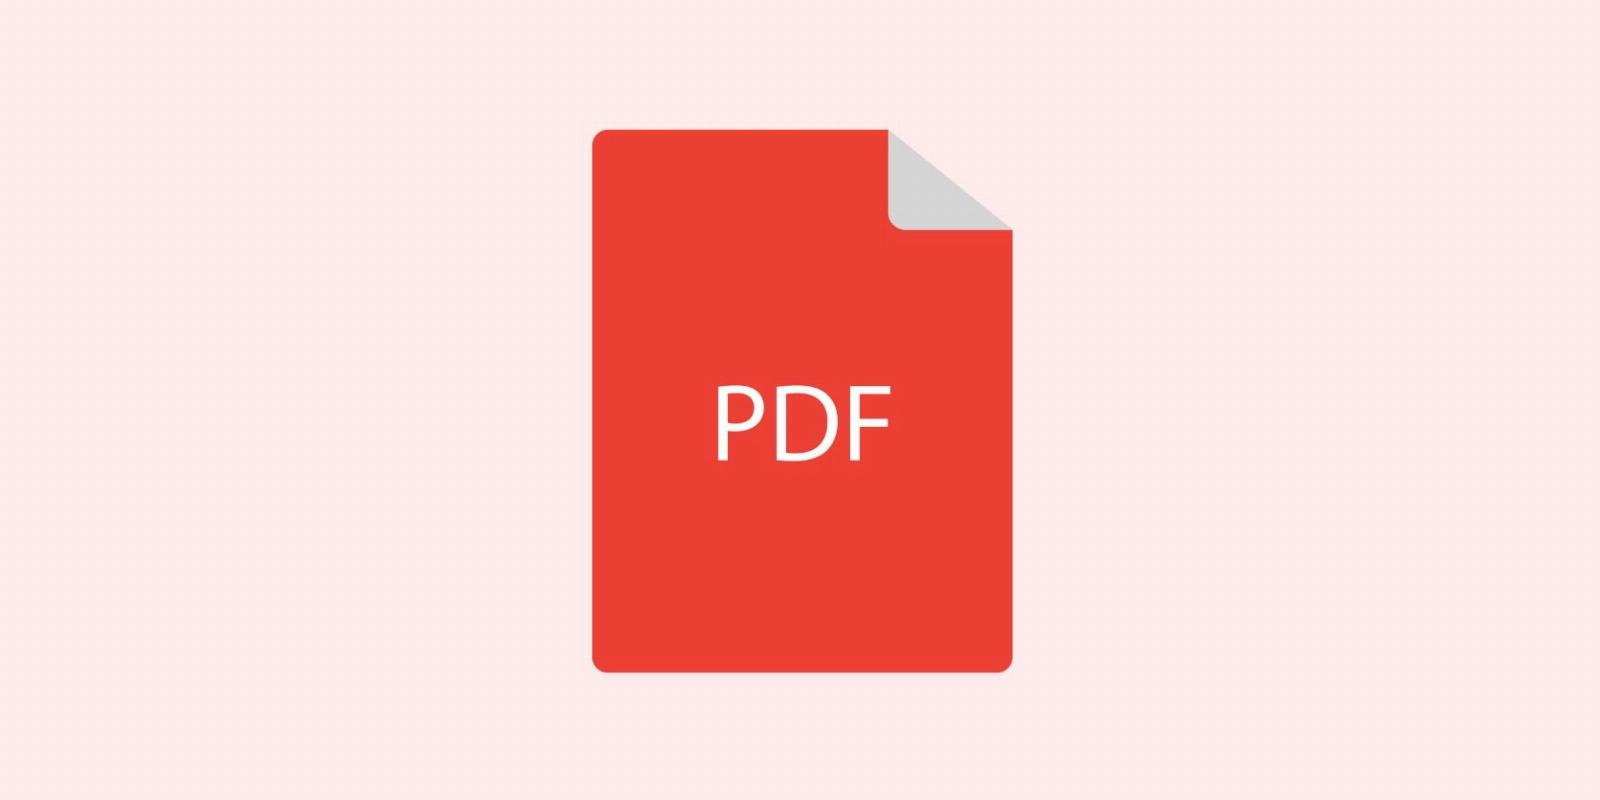 What Does PDF Stand For and How Many PDF Formats Are There?